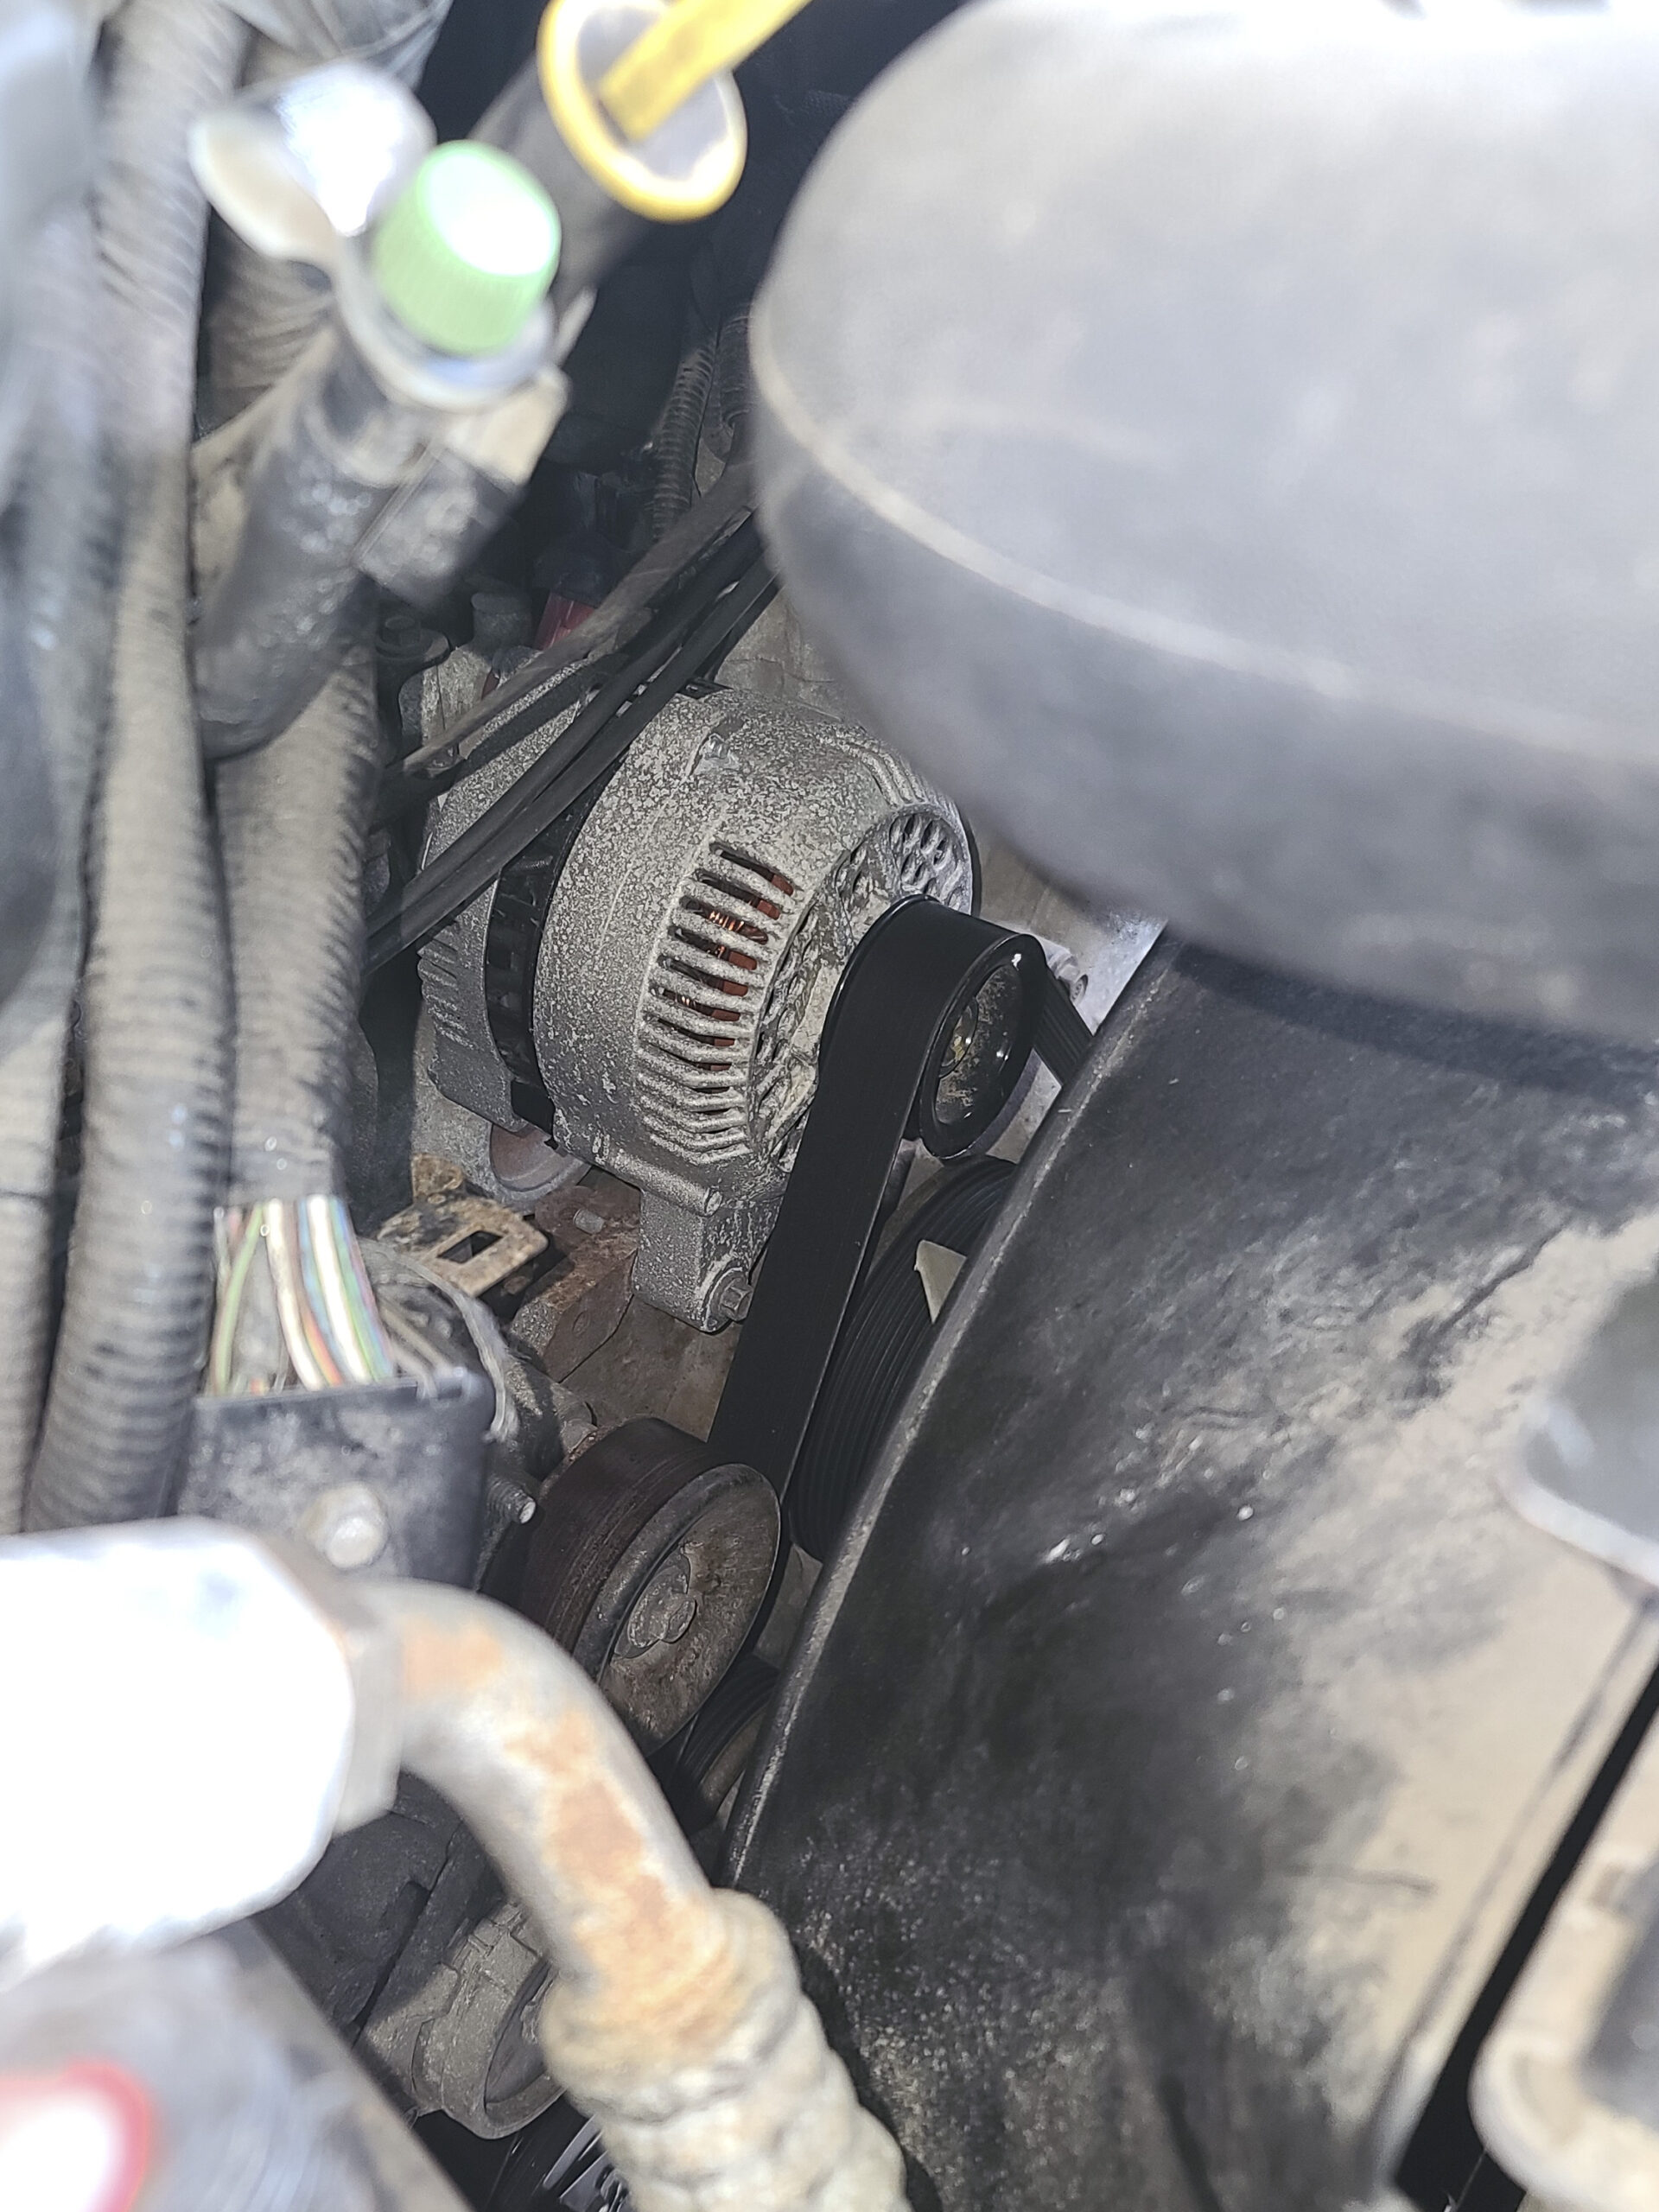 A photo looking under the hood of a motorhome, showing the alternator and belt.